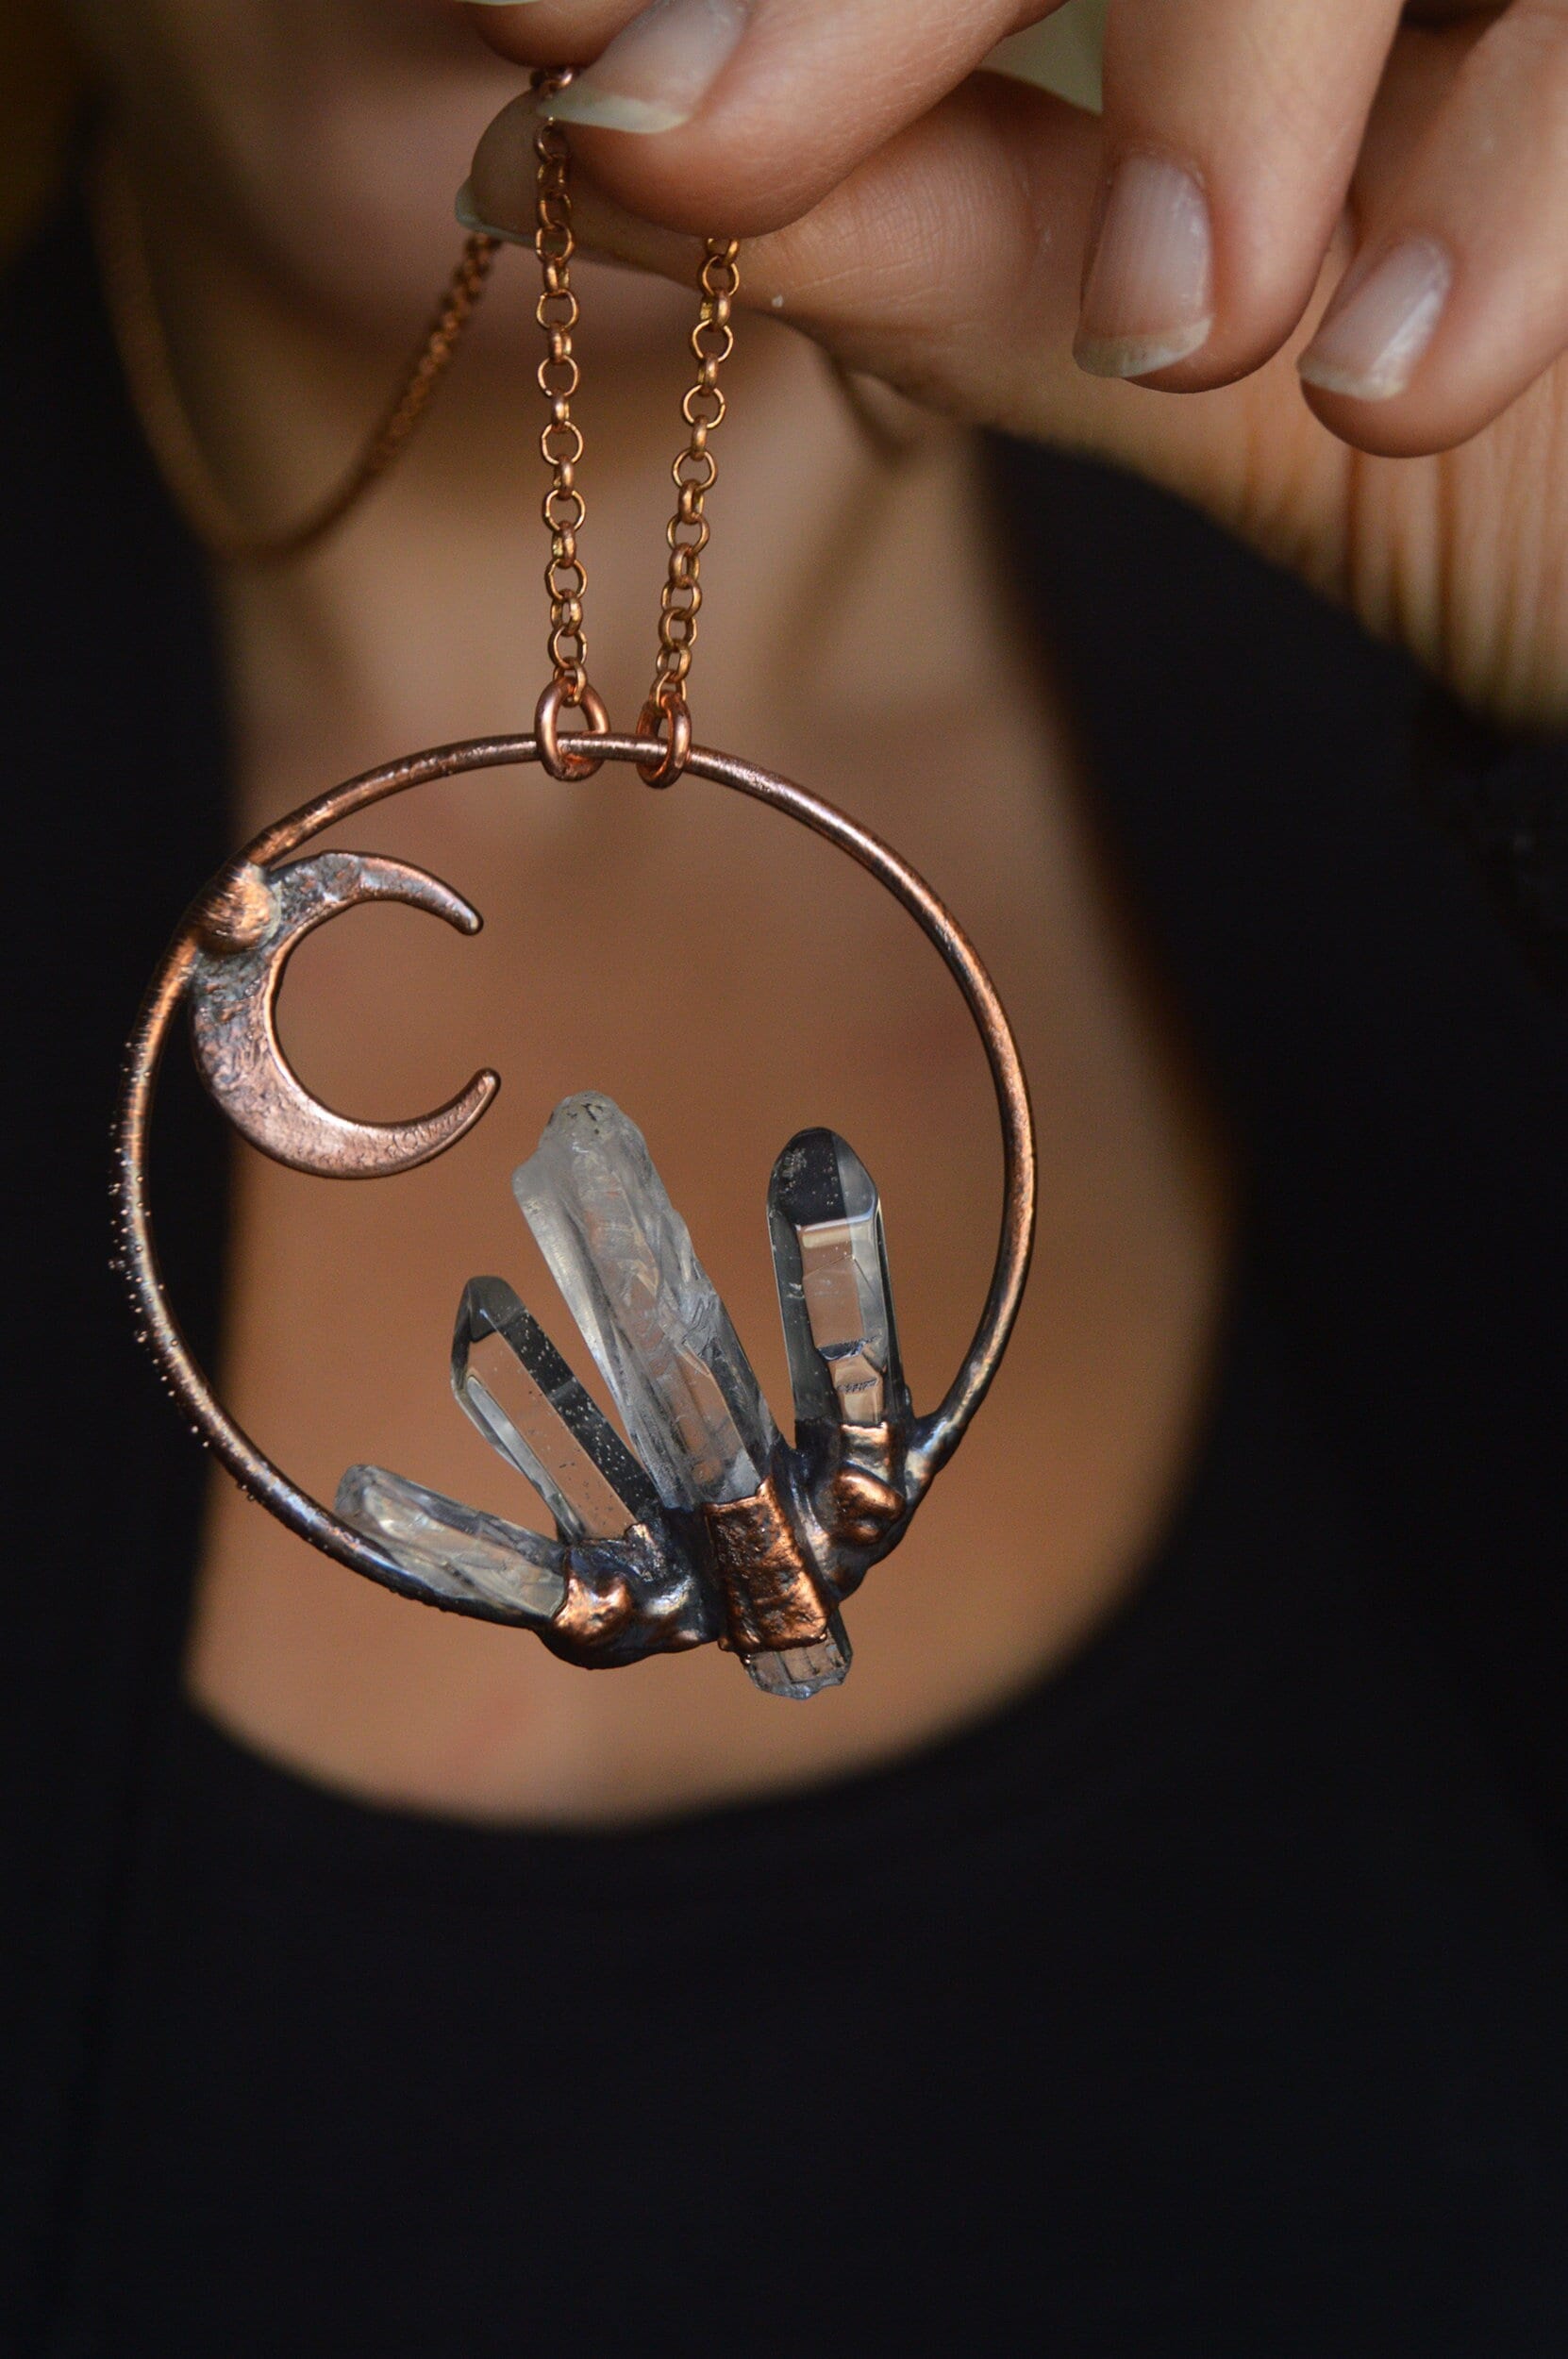 Copper crystal garden with quartz and crescent moon. Dreamy whimsical jewellery